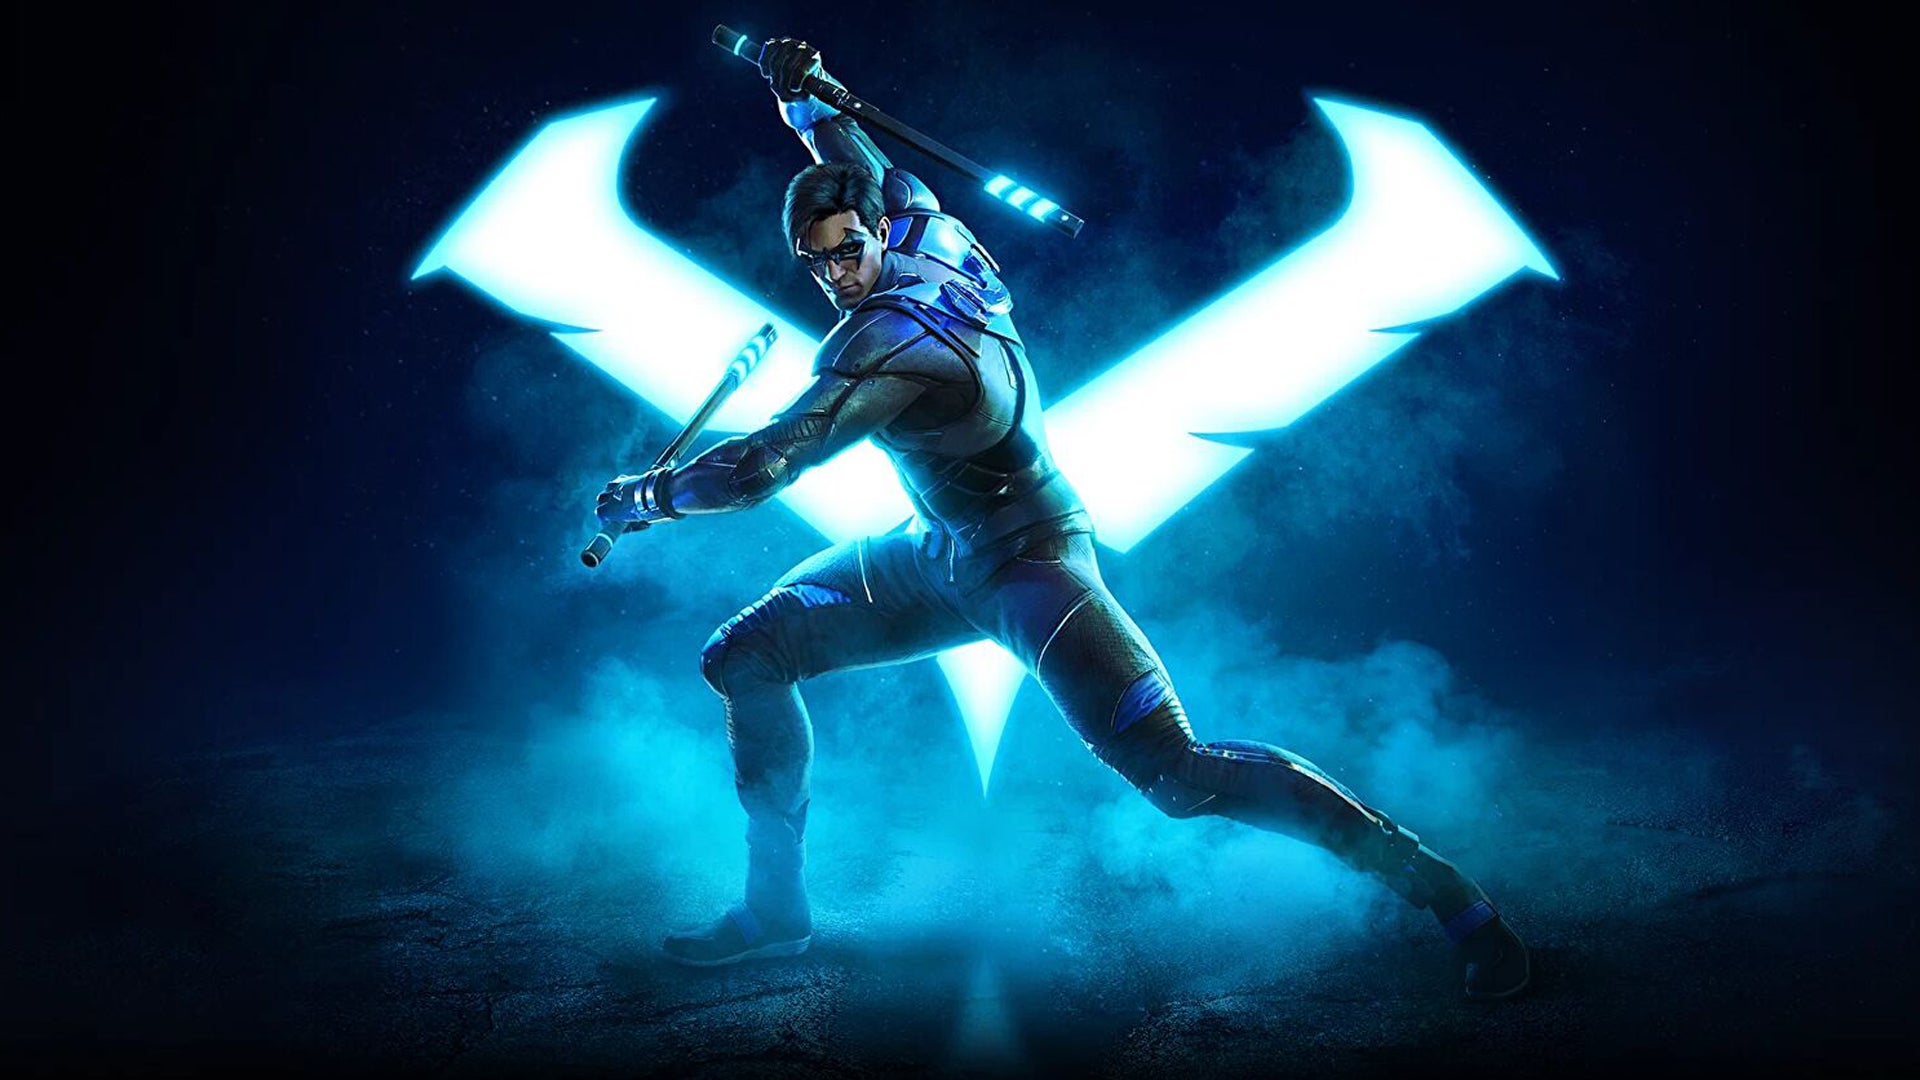 Gotham Knights cutscenes will play out differently depending on the character, has Nightwing rump fan service